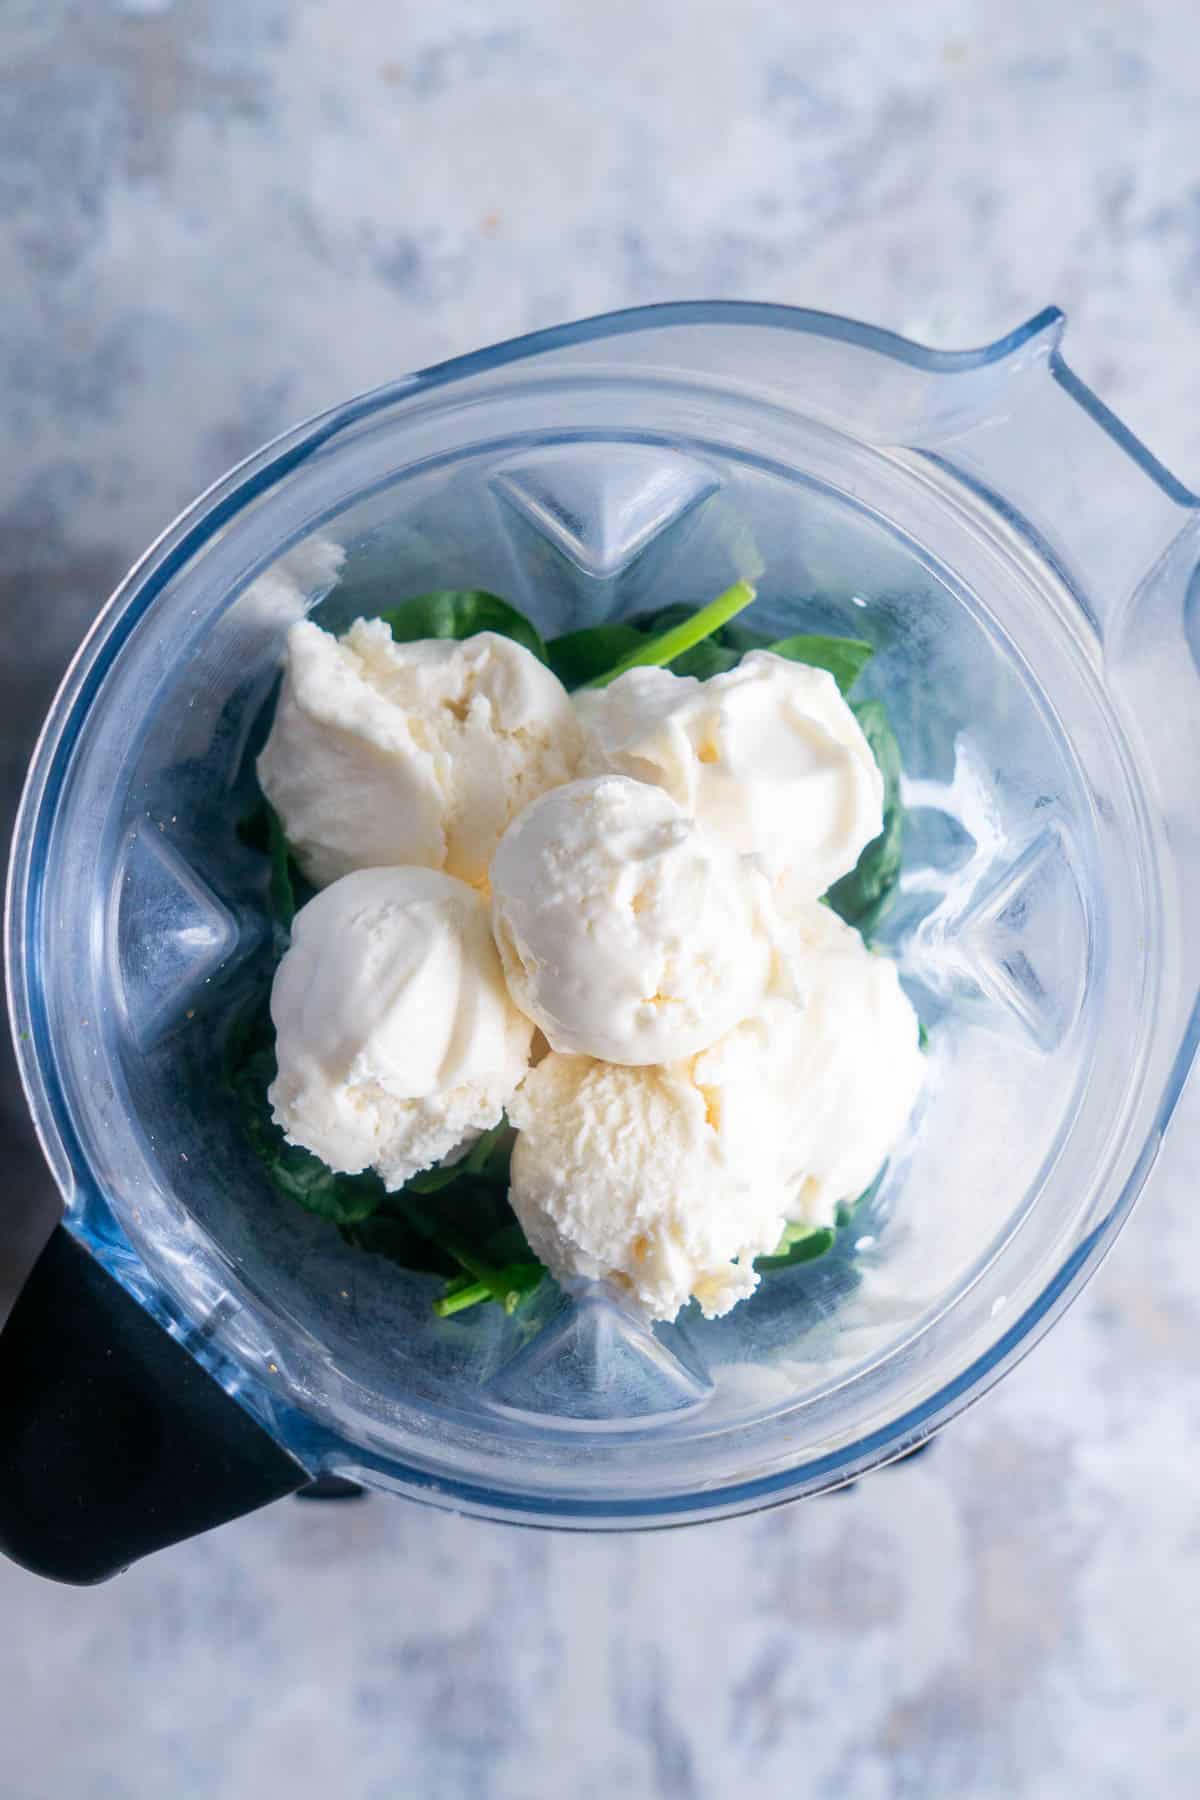 vanilla ice cream and fresh spinach leaves in blender